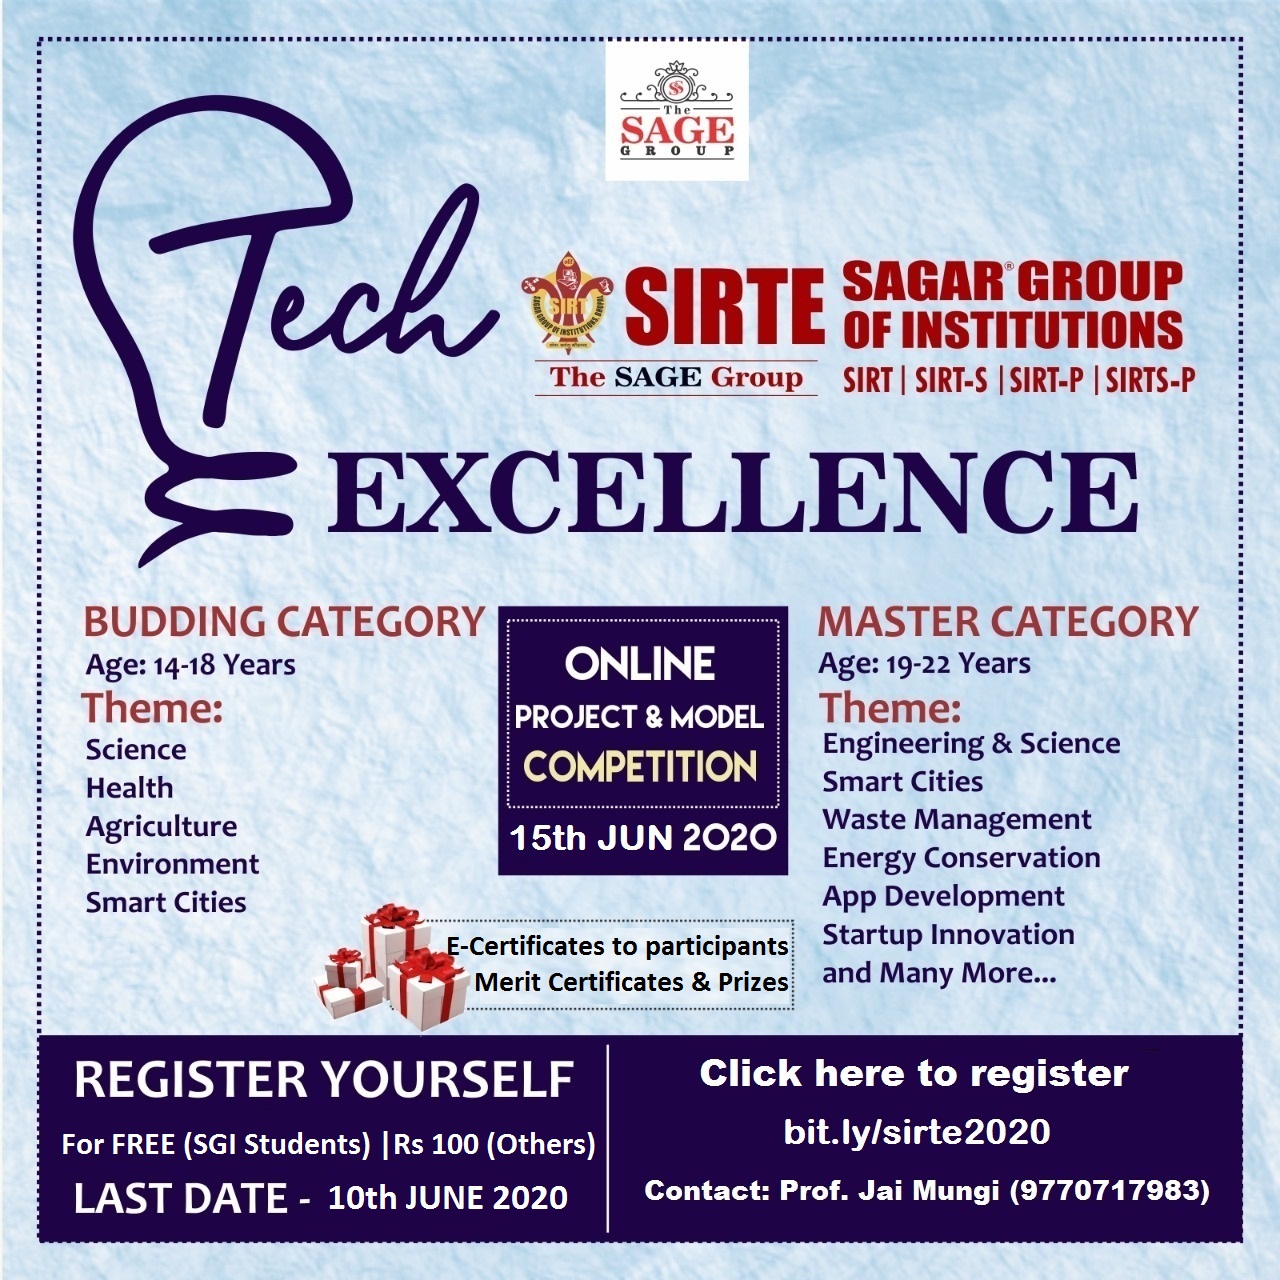 Online Project and Model Competition - Tech-Excellence 2020